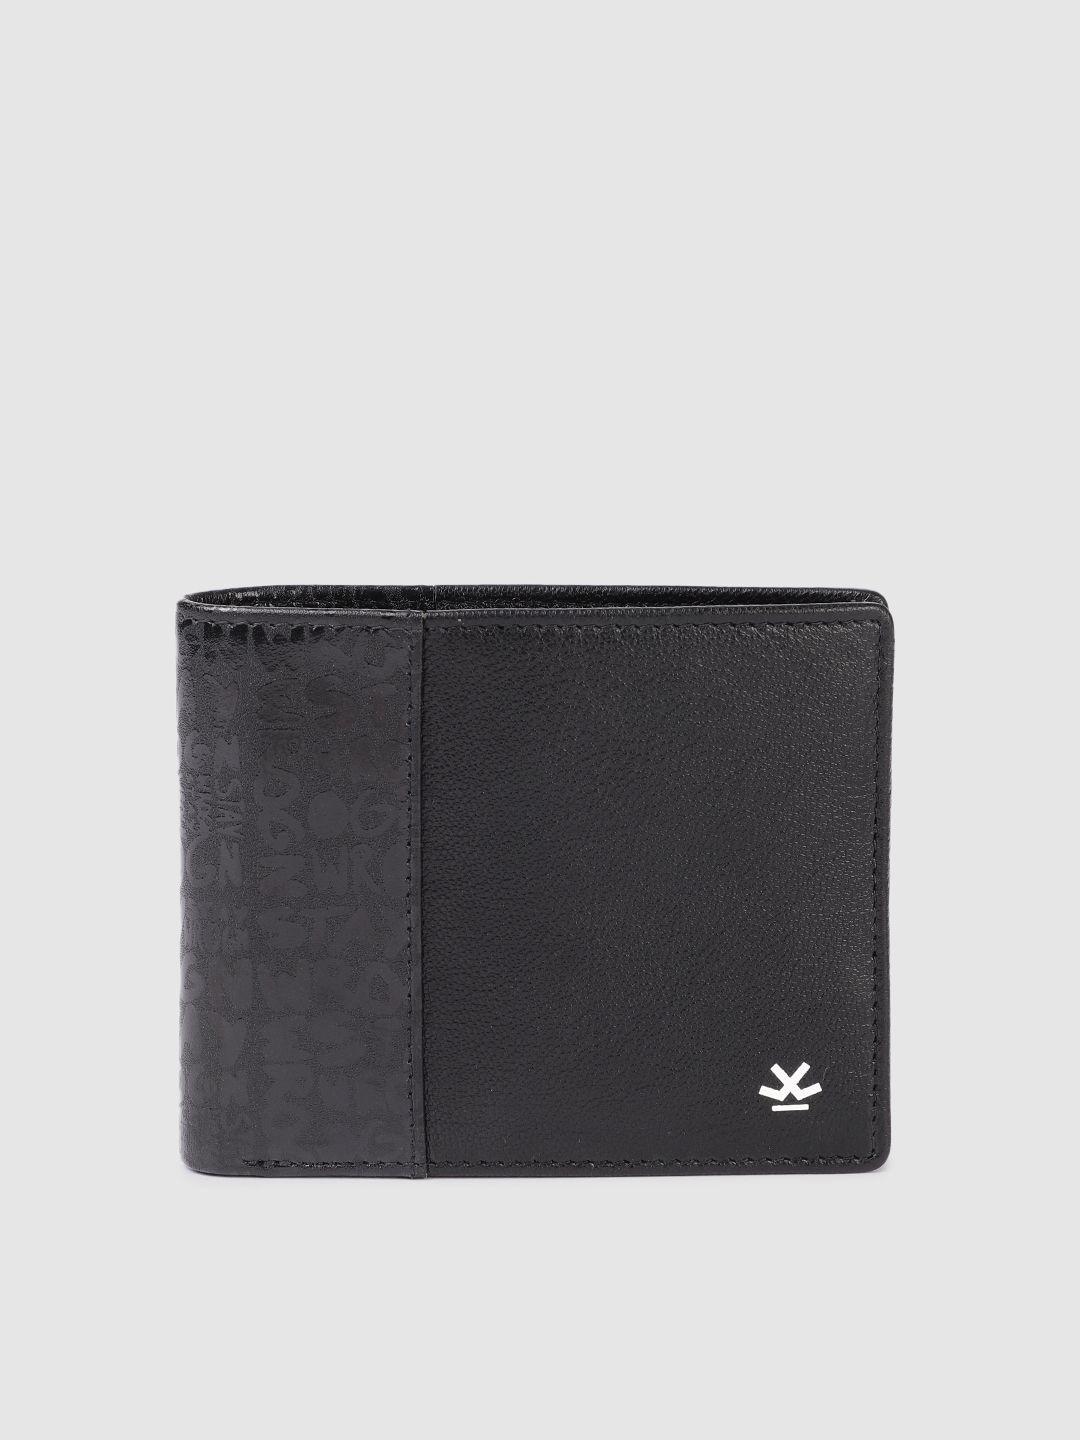 wrogn men brand logo printed leather two fold wallet